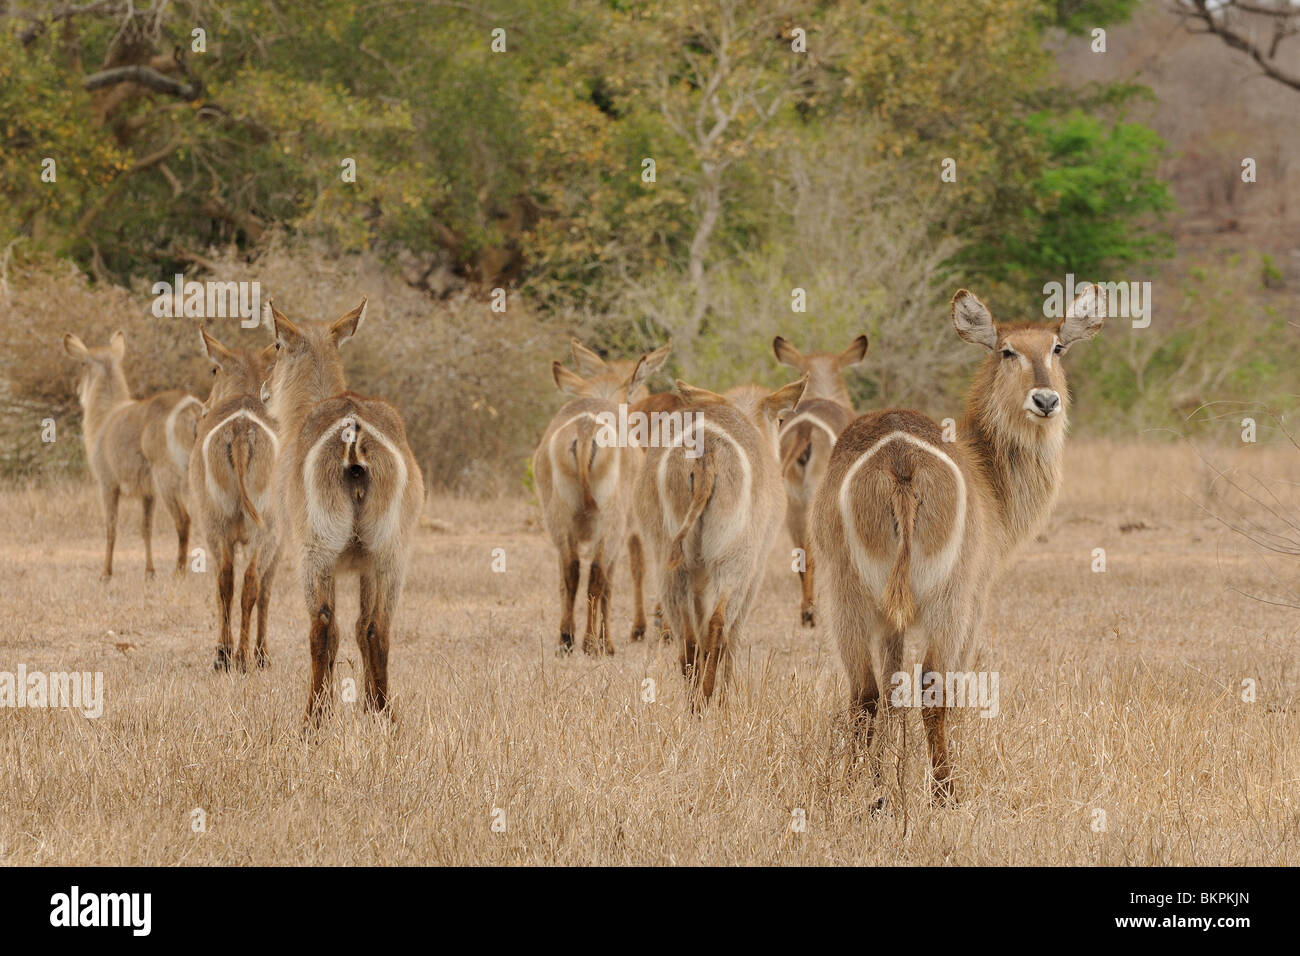 Group of adult females waterbuck in backview in African savanna landscape Stock Photo